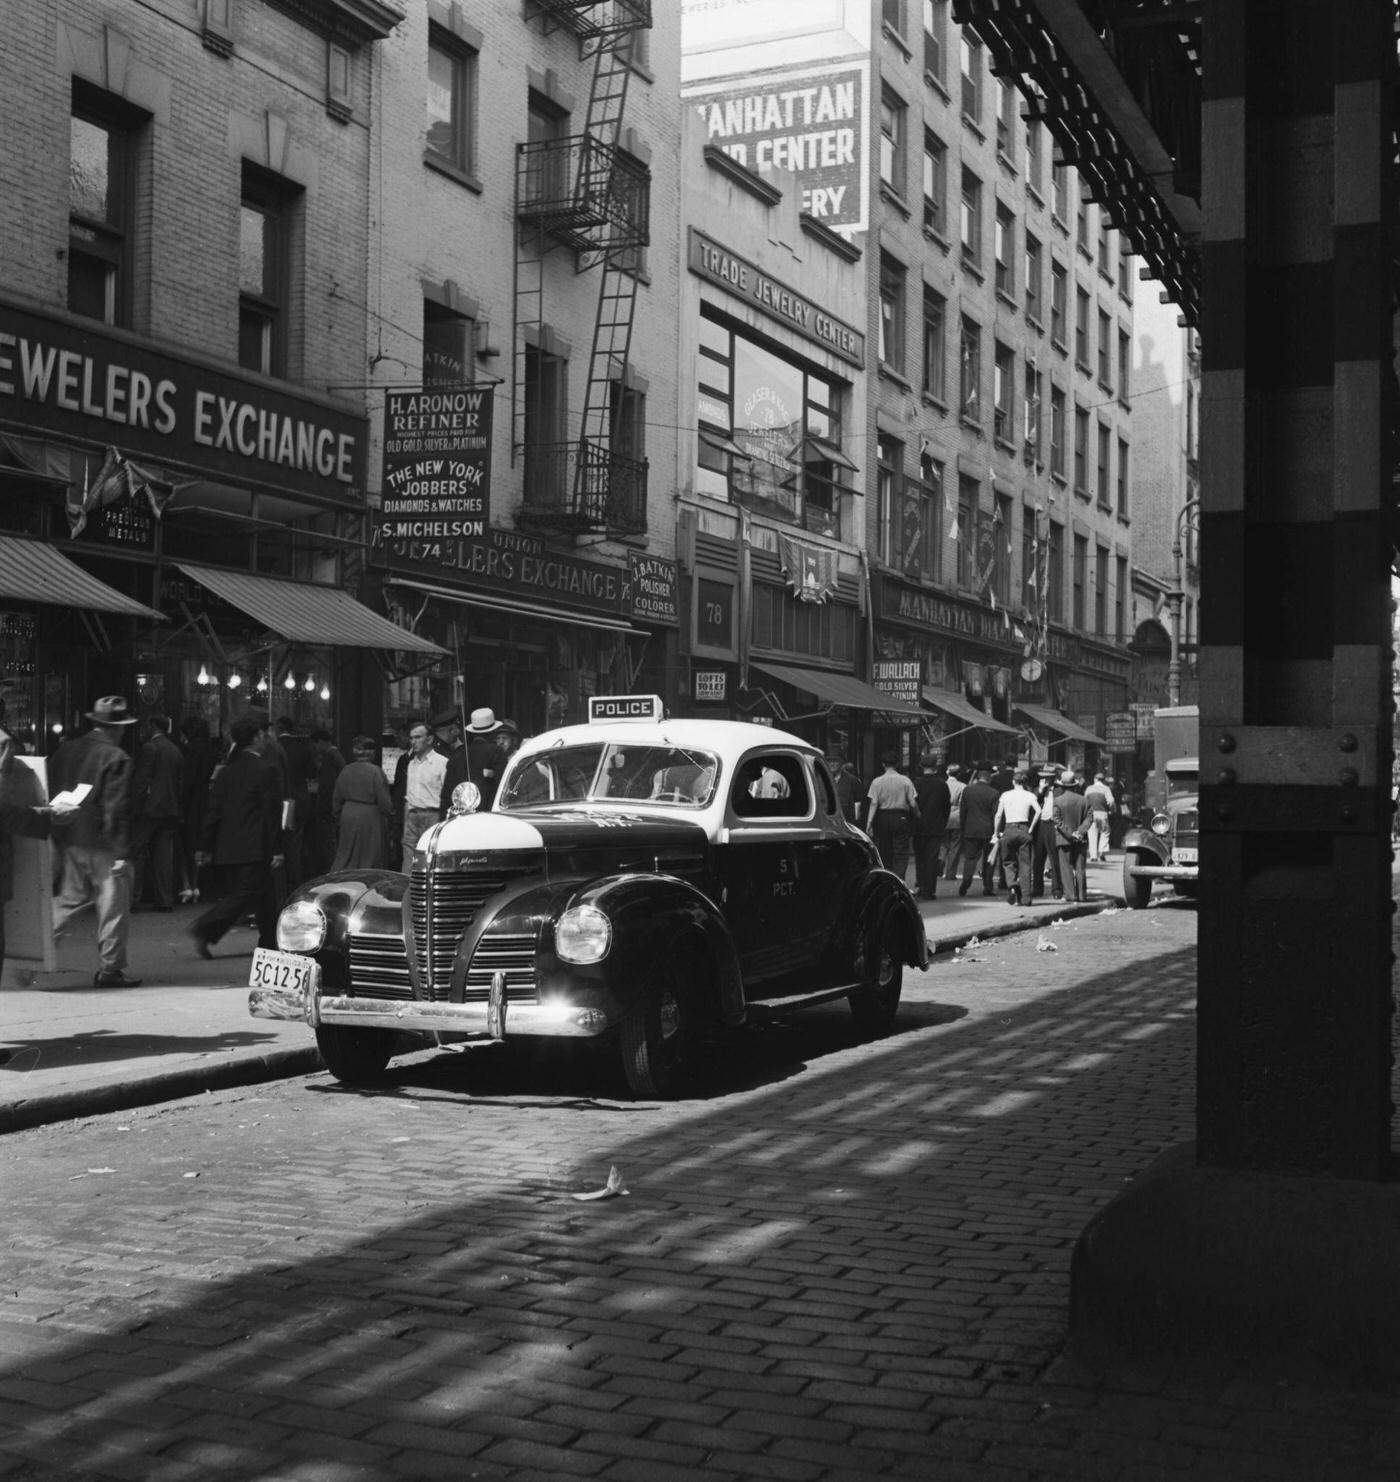 Jewel District Of New York: Police Car In A Jewelry District Of Manhattan, 1950.